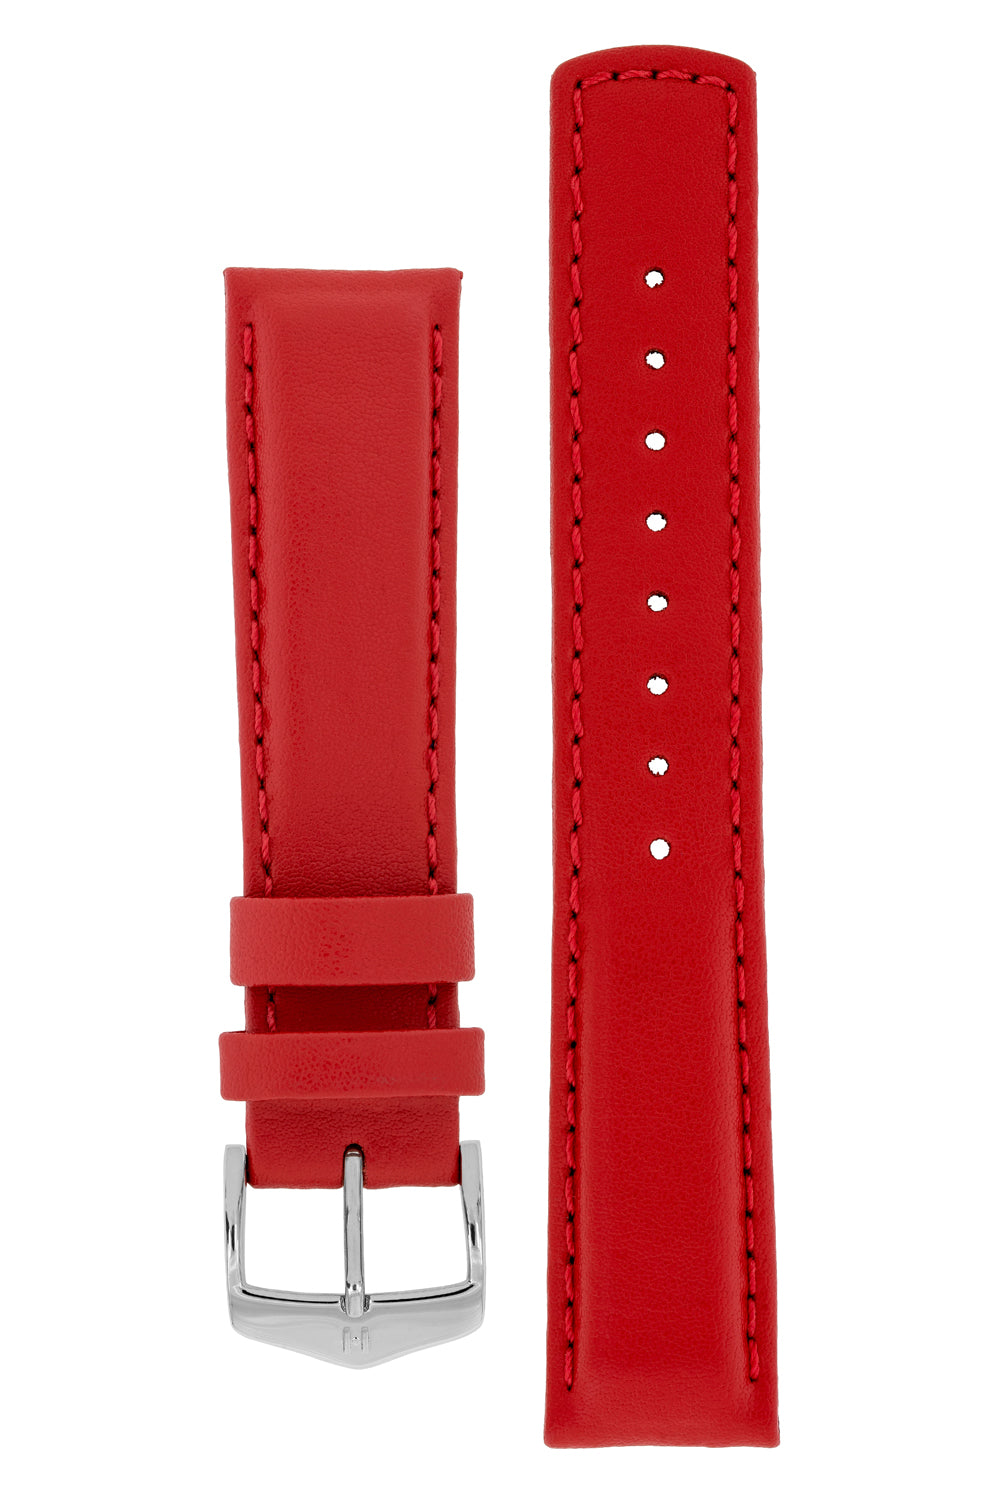 Hirsch Rrunner Water-Resistant Calf Leather Watch Strap in Red (with Polished Silver Steel H-Classic Buckle)